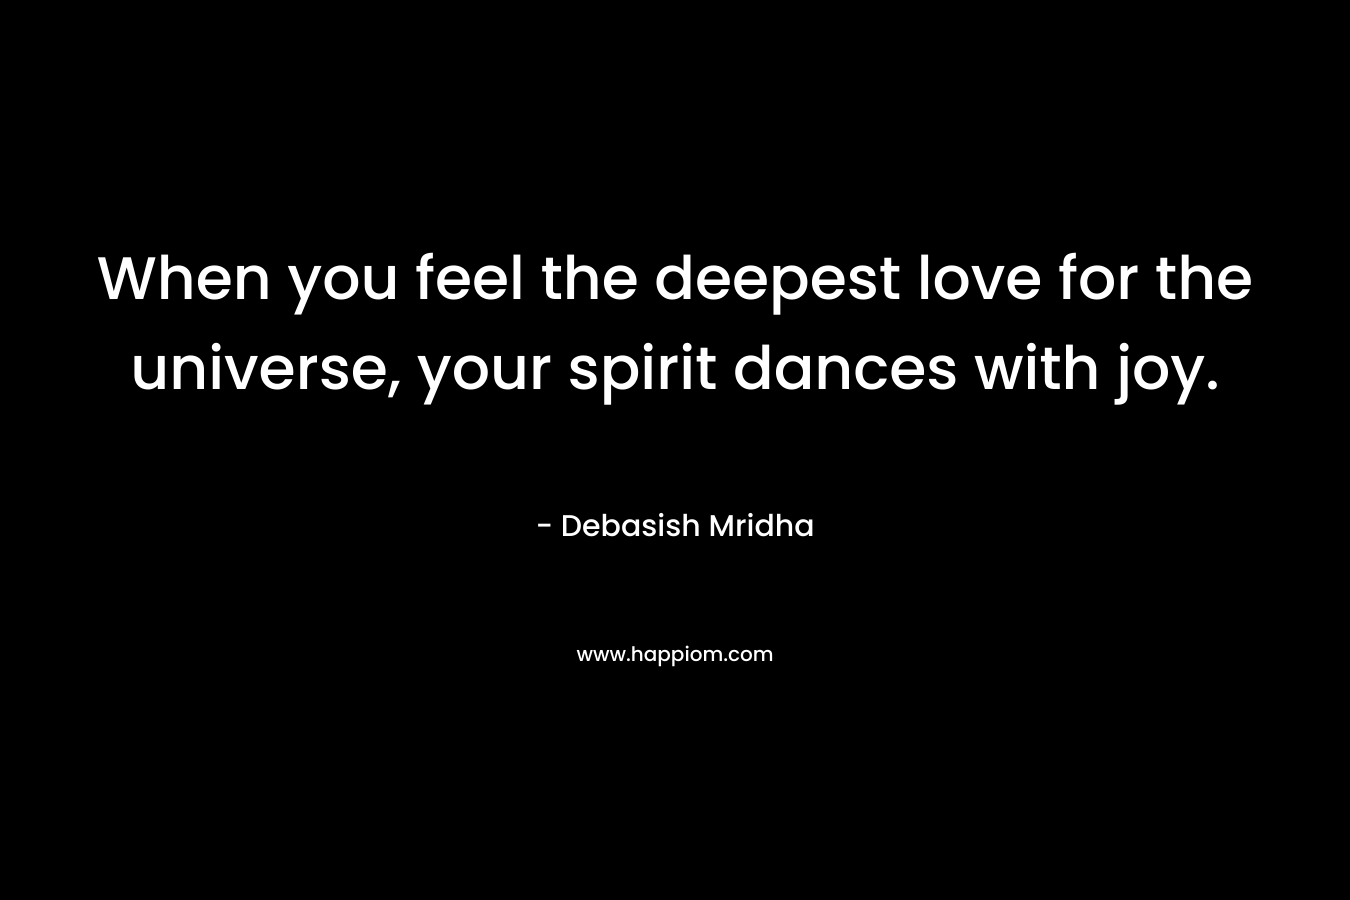 When you feel the deepest love for the universe, your spirit dances with joy.